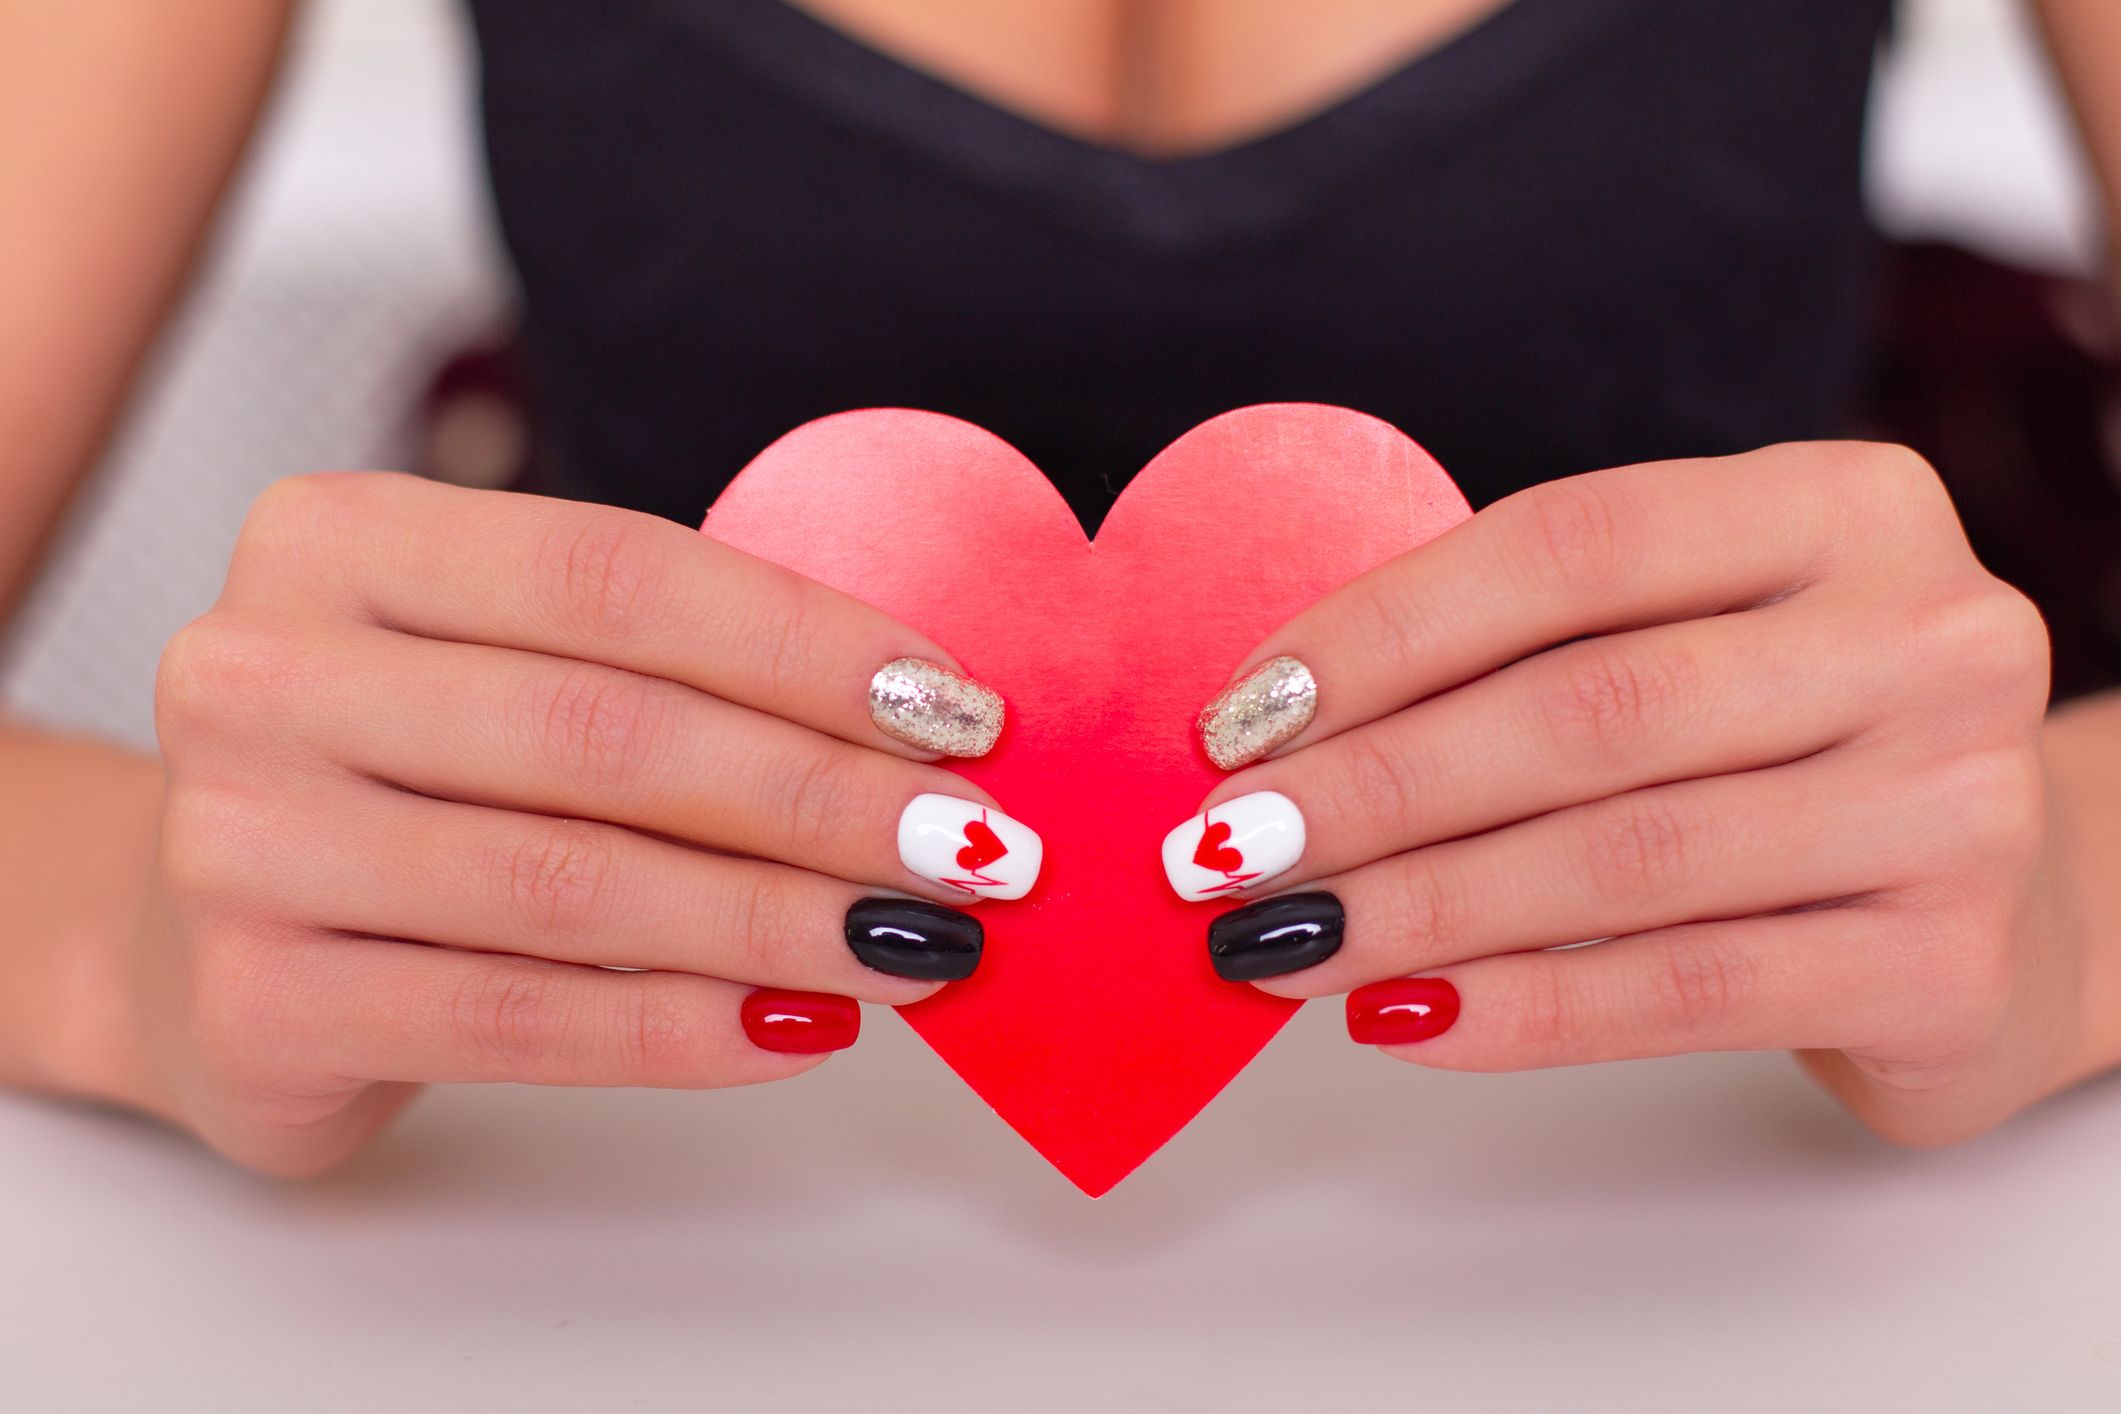 These Nail Designs Prove Black & Red Are the Best Combo